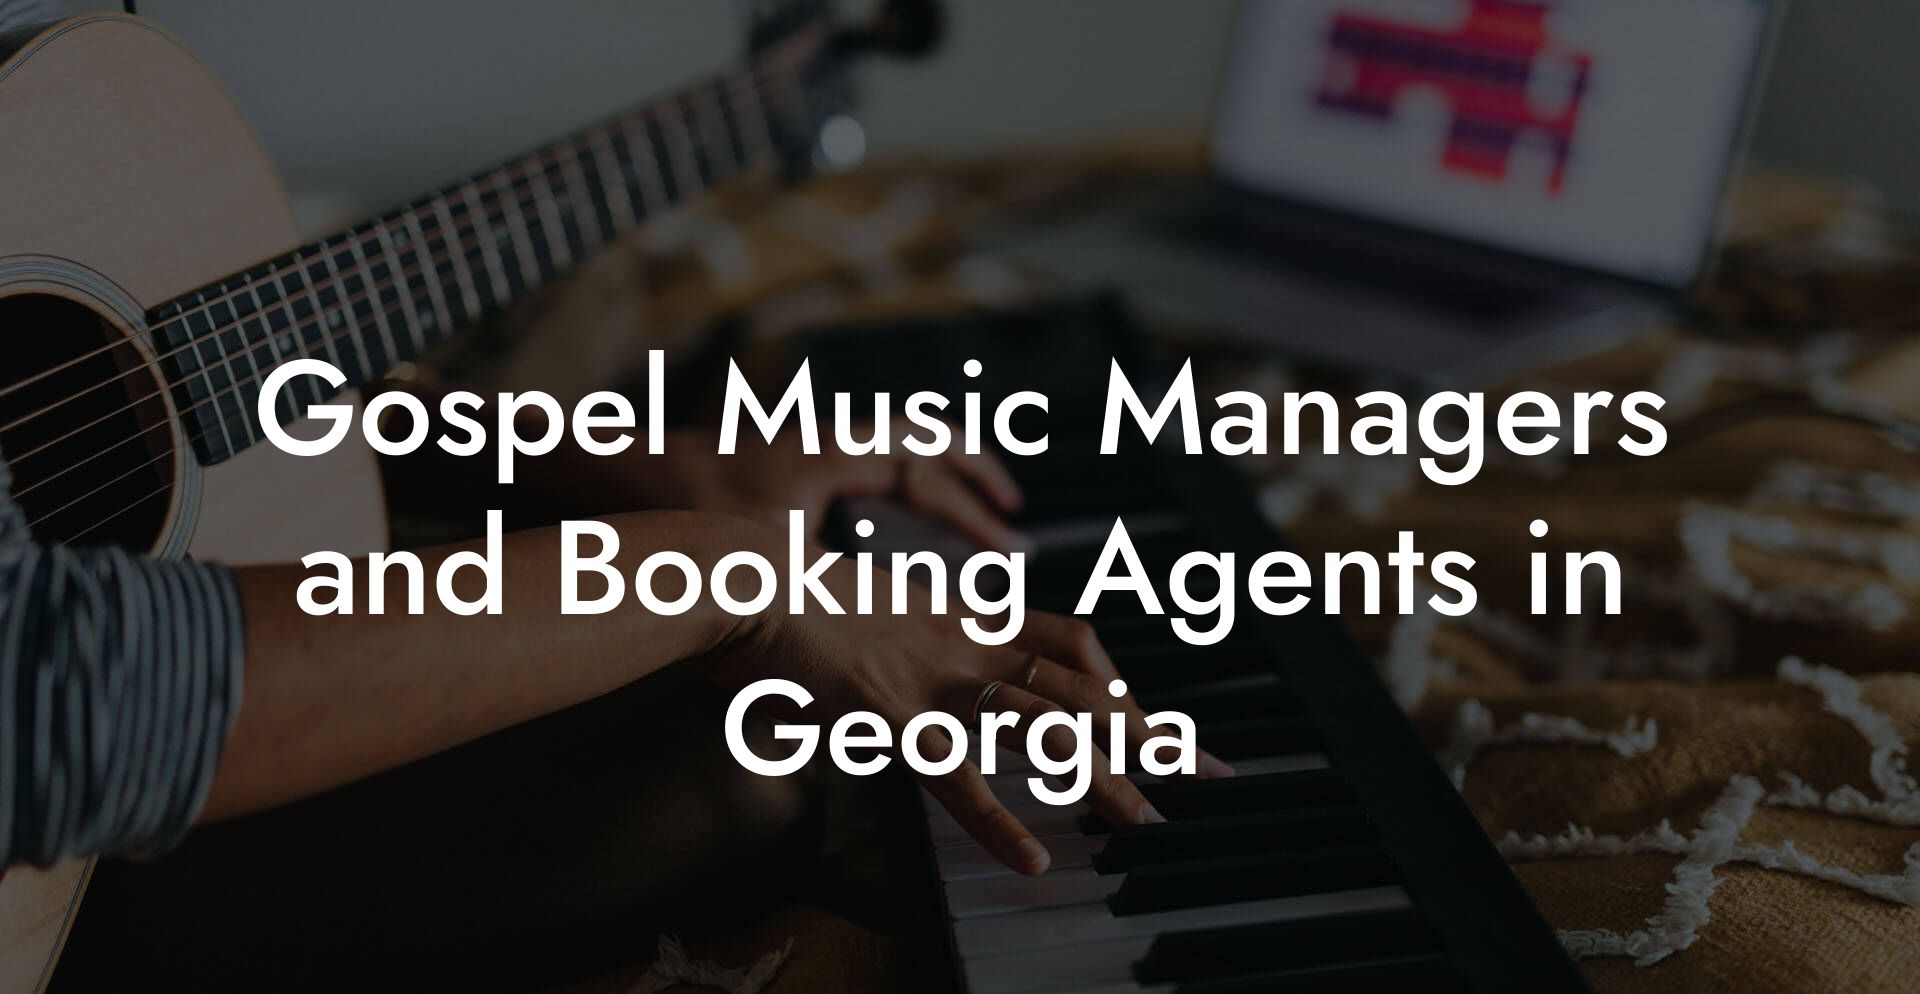 Gospel Music Managers and Booking Agents in Georgia